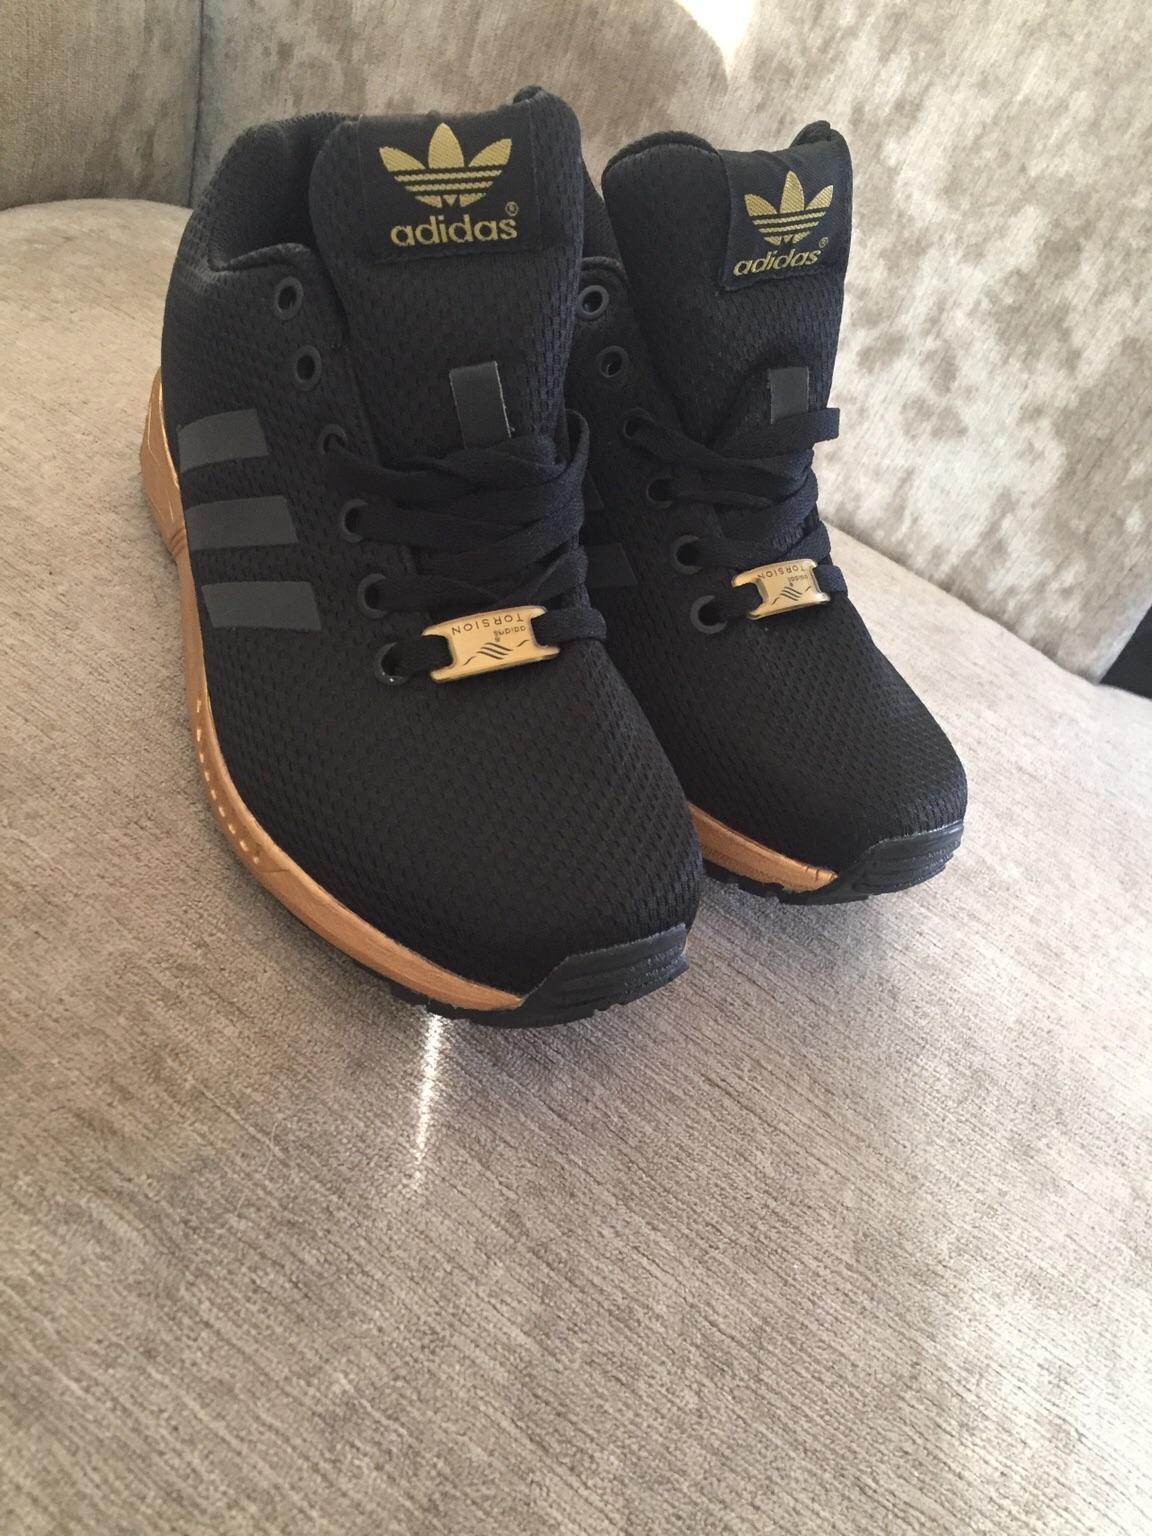 Shoes, Adidas Shoes, Adidas Rose Gold Zx Adidas, Adidas Zx Flux, Black Sneakers, Black, Gold, Adiddas, Black And Gold Flux, Low Top Sneakers Wheretoget | xn--90absbknhbvge.xn--p1ai:443